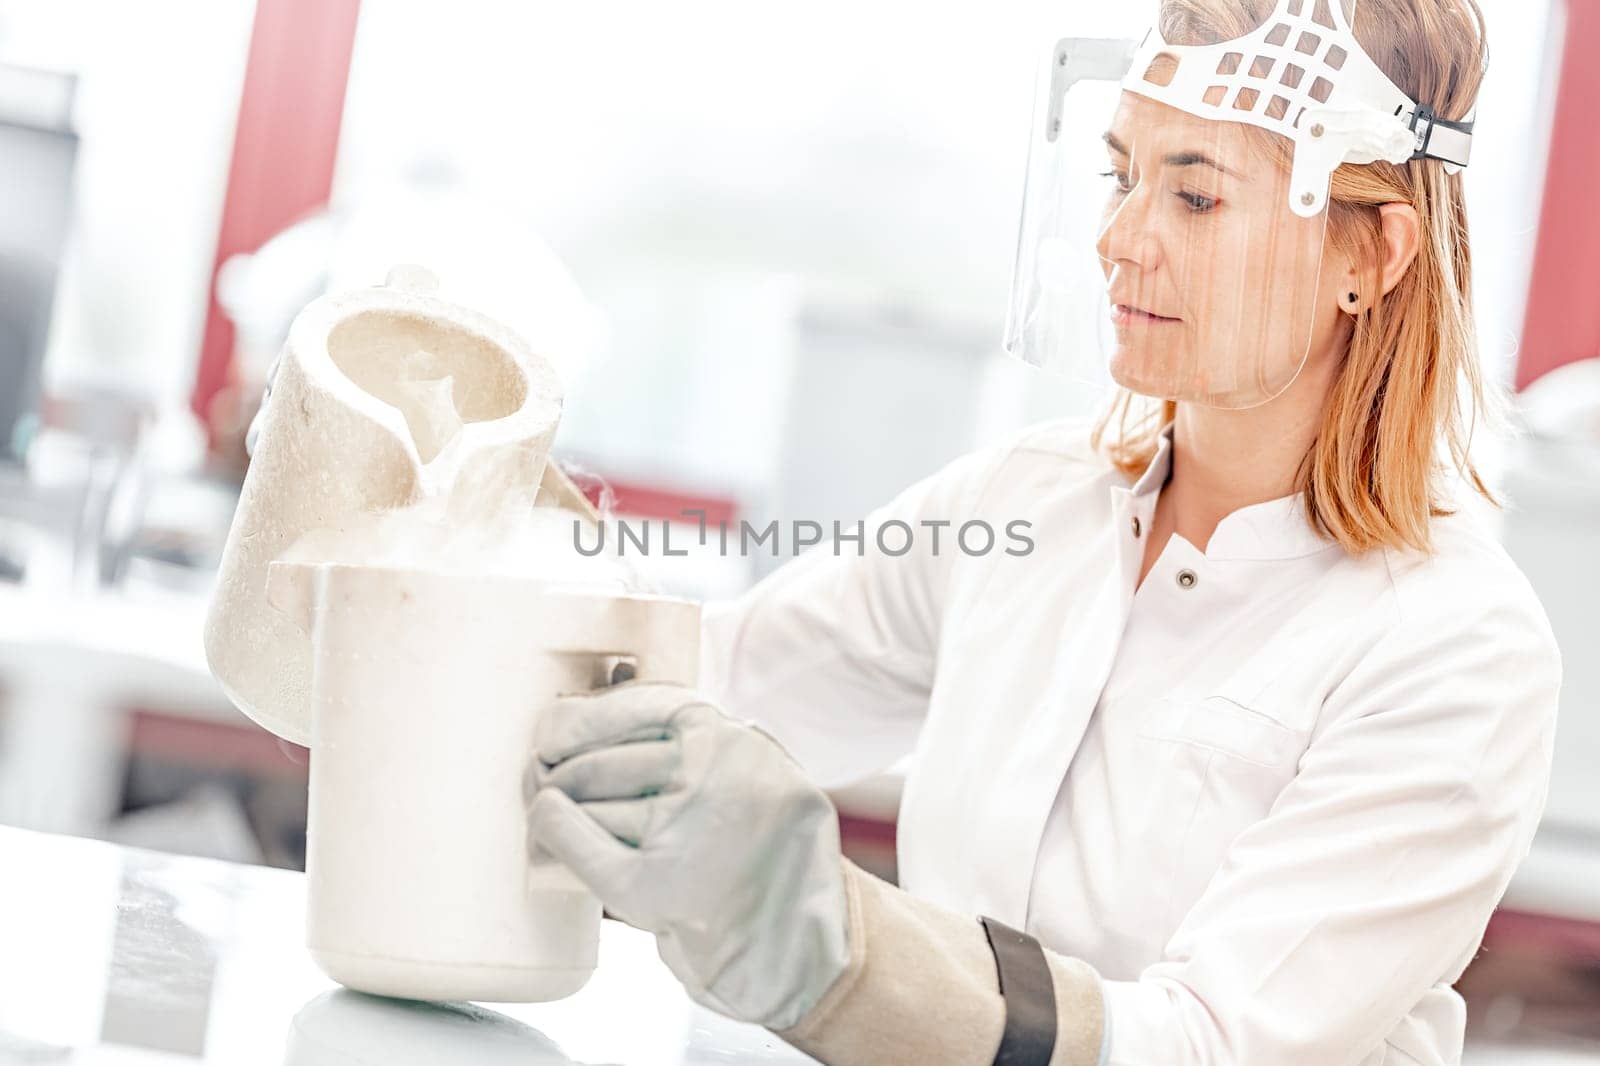 research with liquid nitrogen in the laboratory is carried out by a young female scientist.